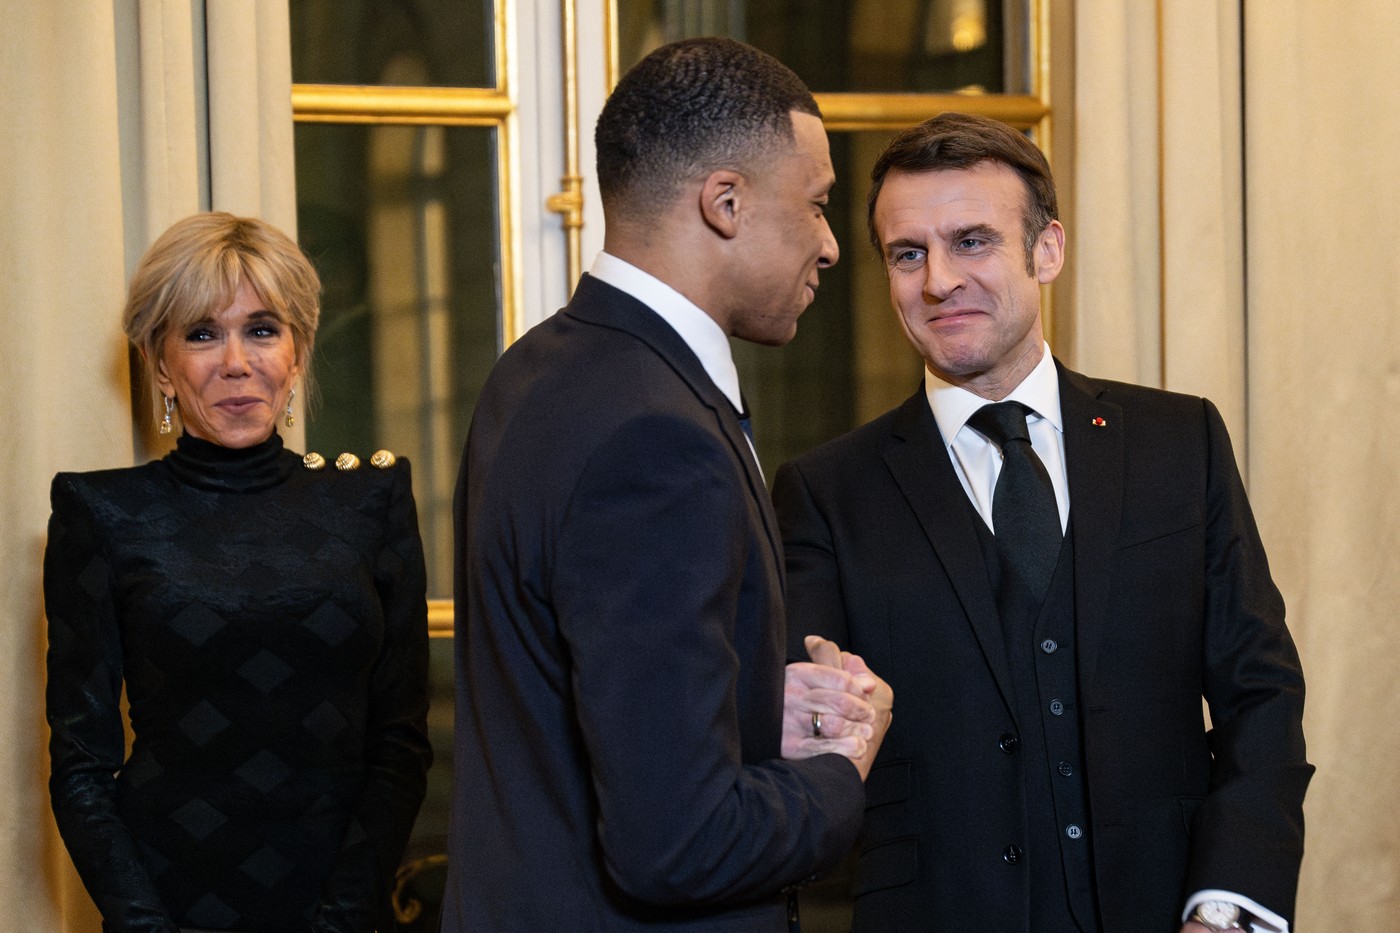 Kylian Mbappe, Brigitte Macron, President Emmanuel Macron, at an official dinner on the sidelines of the state visit of Emir of Qatar Sheikh Tamim bin Hamad Al Thani at the Elysee Palace in Paris, France on February 27, 2024.
State Dinner In Honor Of Qatar's Emir - Paris, France - 27 Feb 2024,Image: 851706815, License: Rights-managed, Restrictions: , Model Release: no